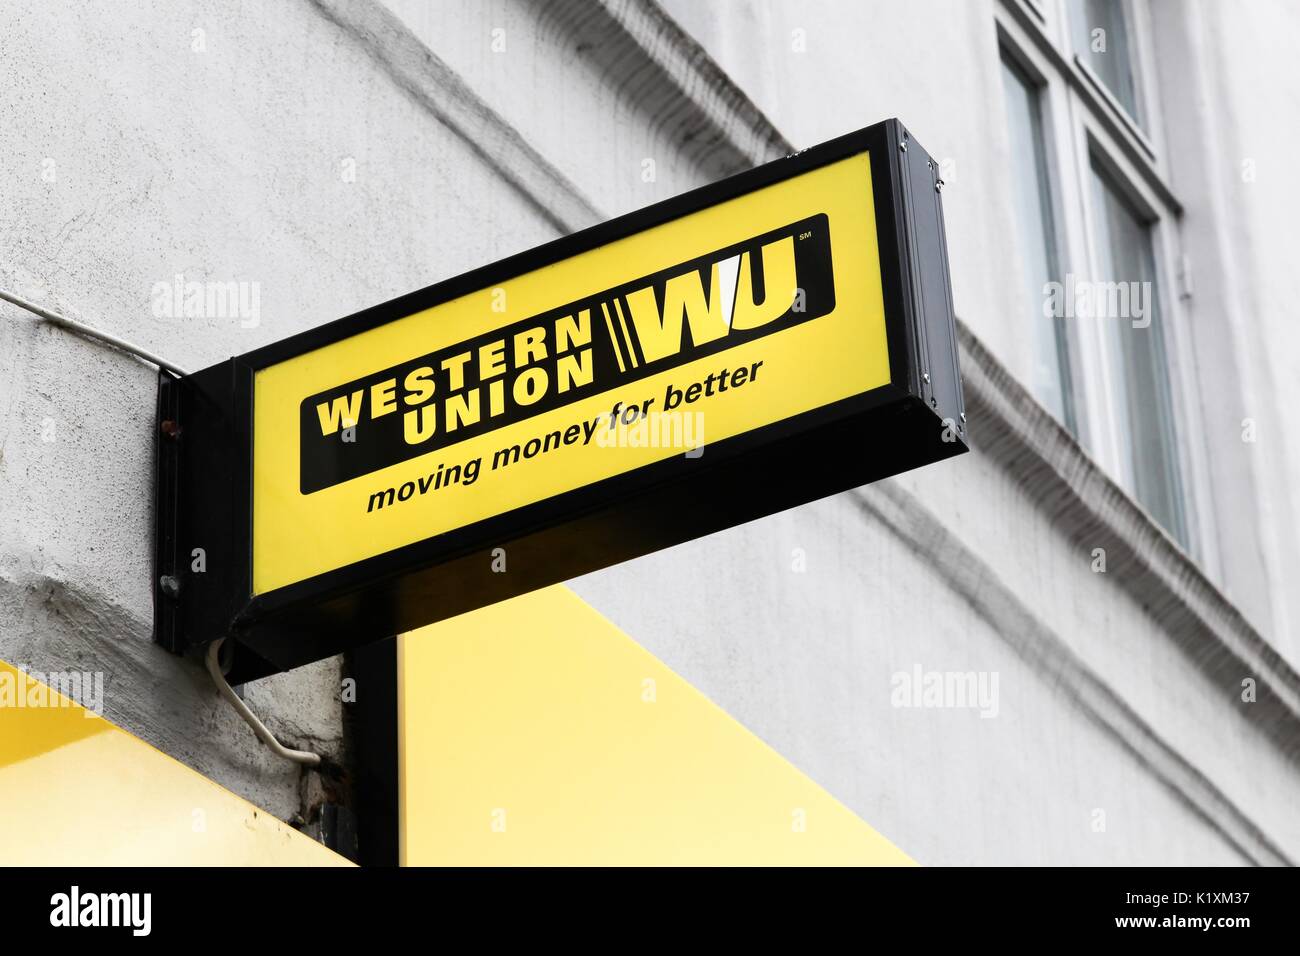 Aarhus, Denmark - July 15, 2017: Western Union sign and logo on a facade. The Western Union company is an american financial services Stock Photo